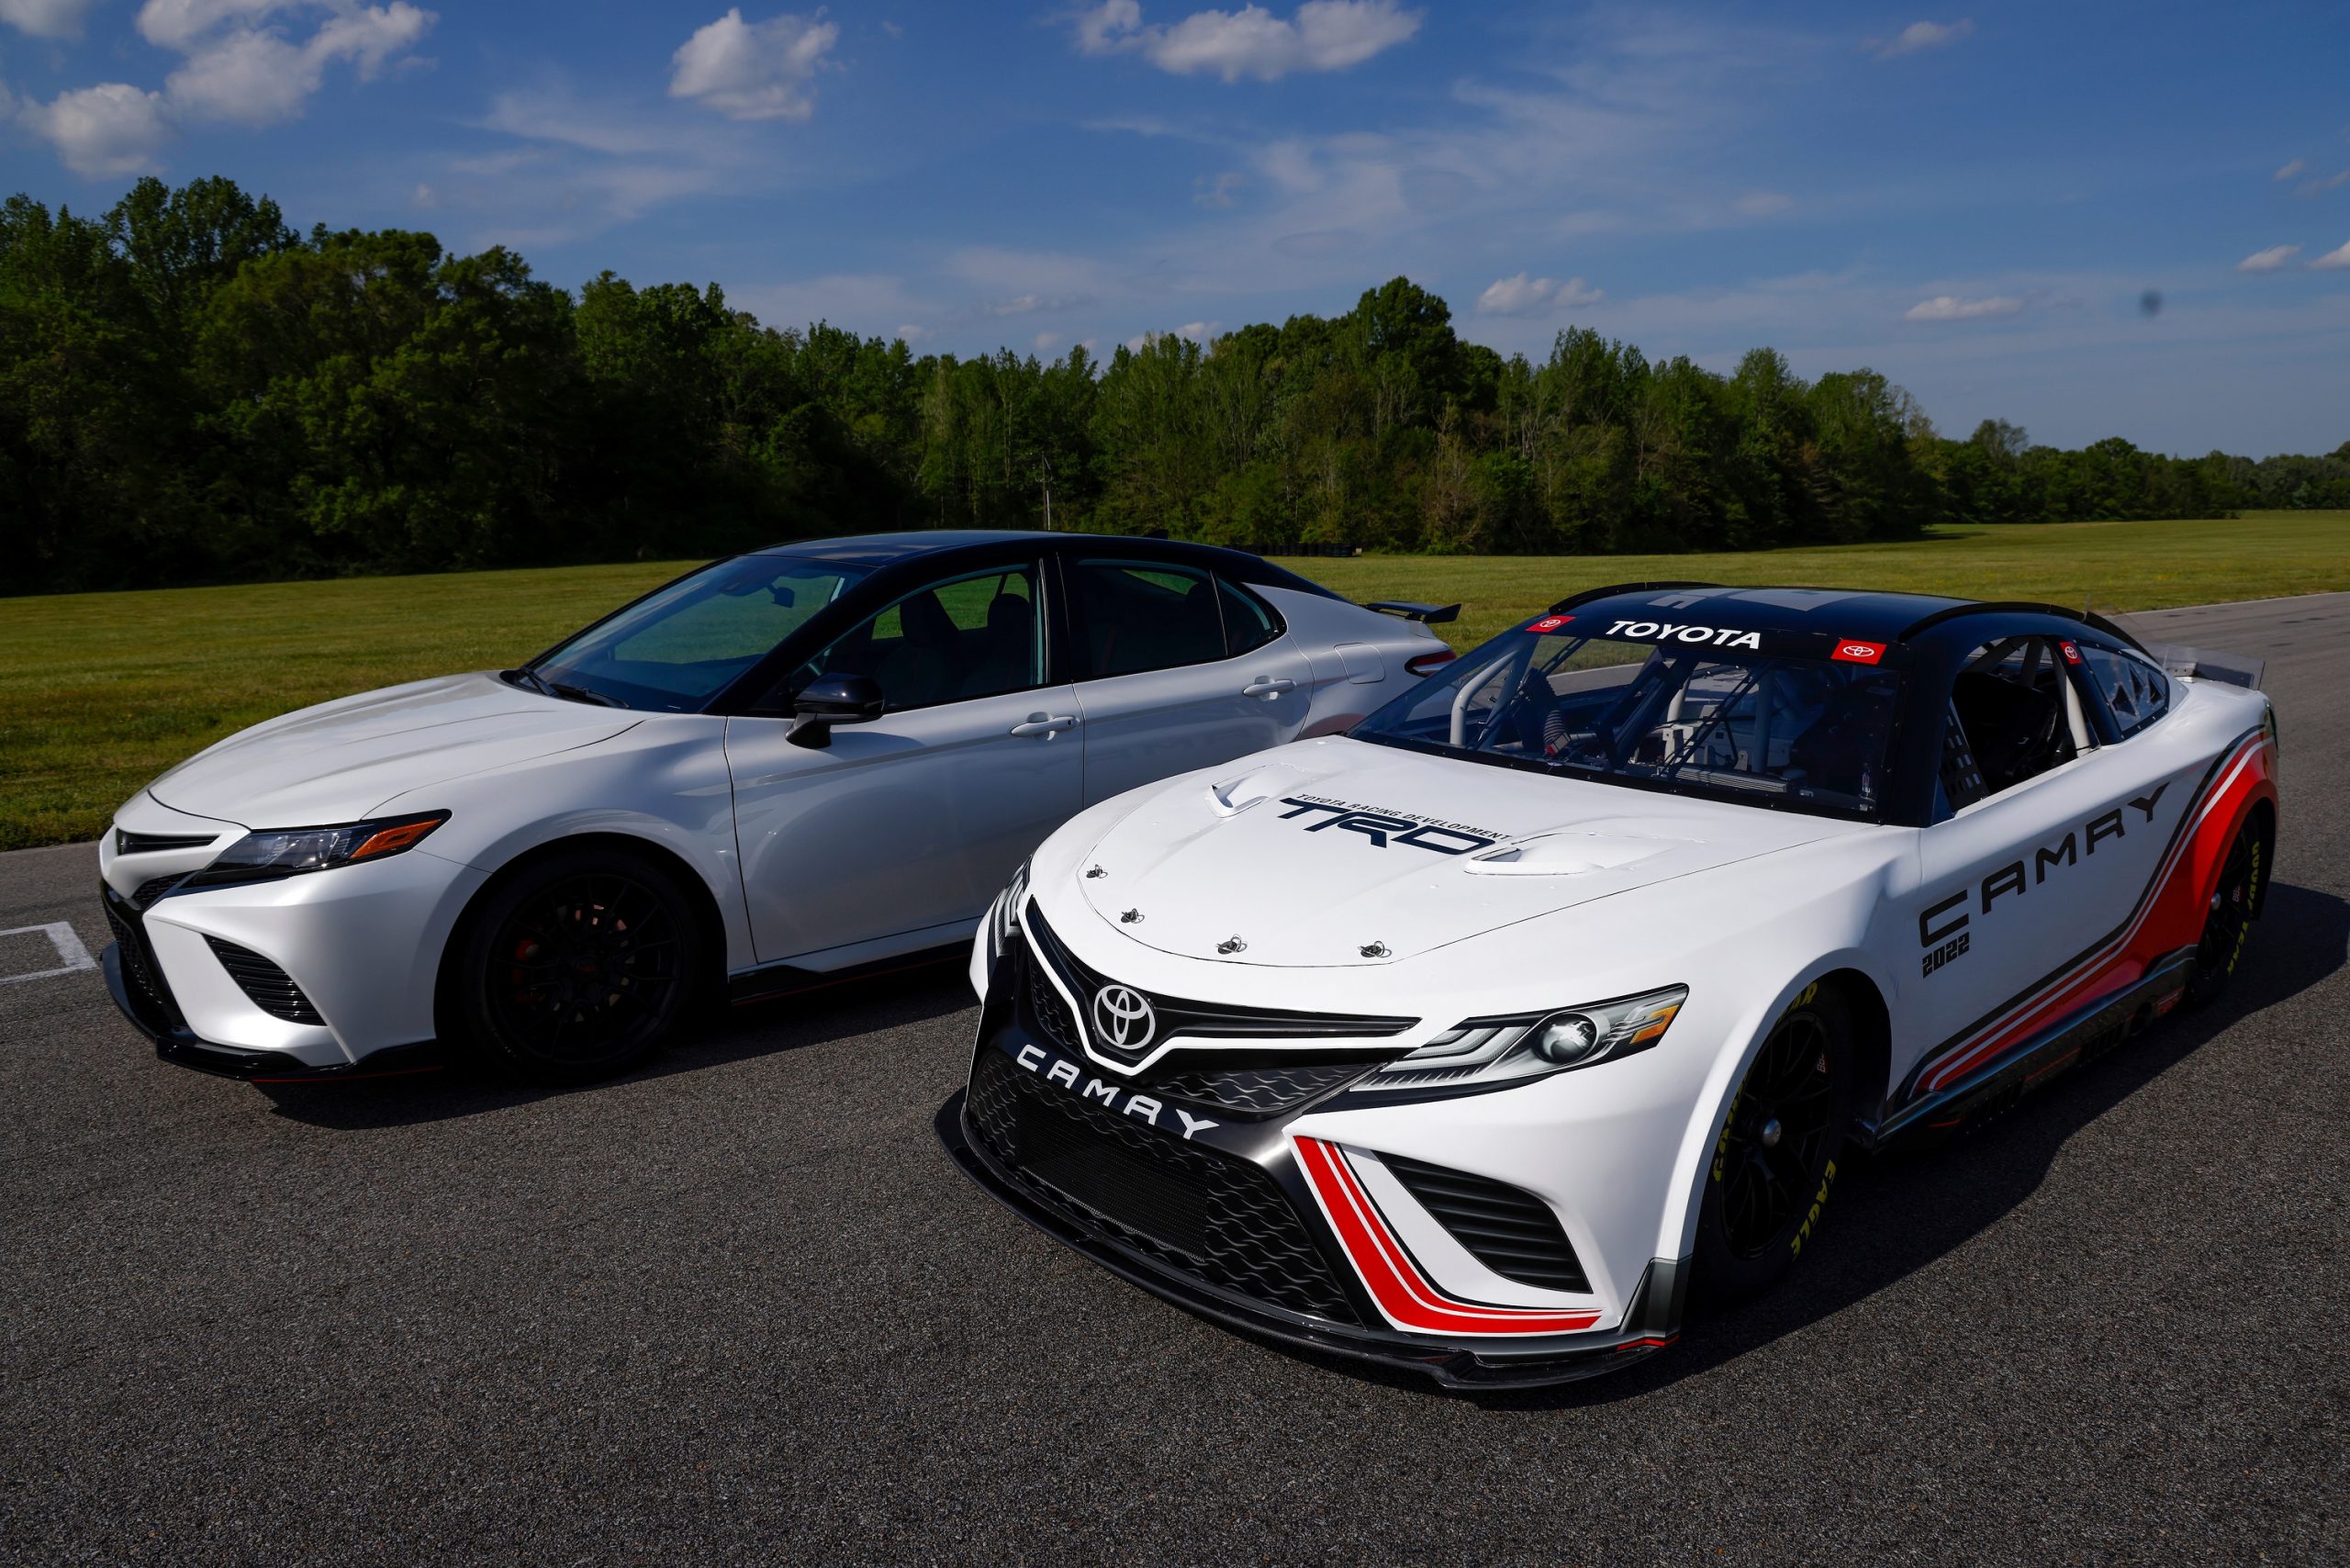 A white TRD Camry next to the brand's stock car for NASCAR competition